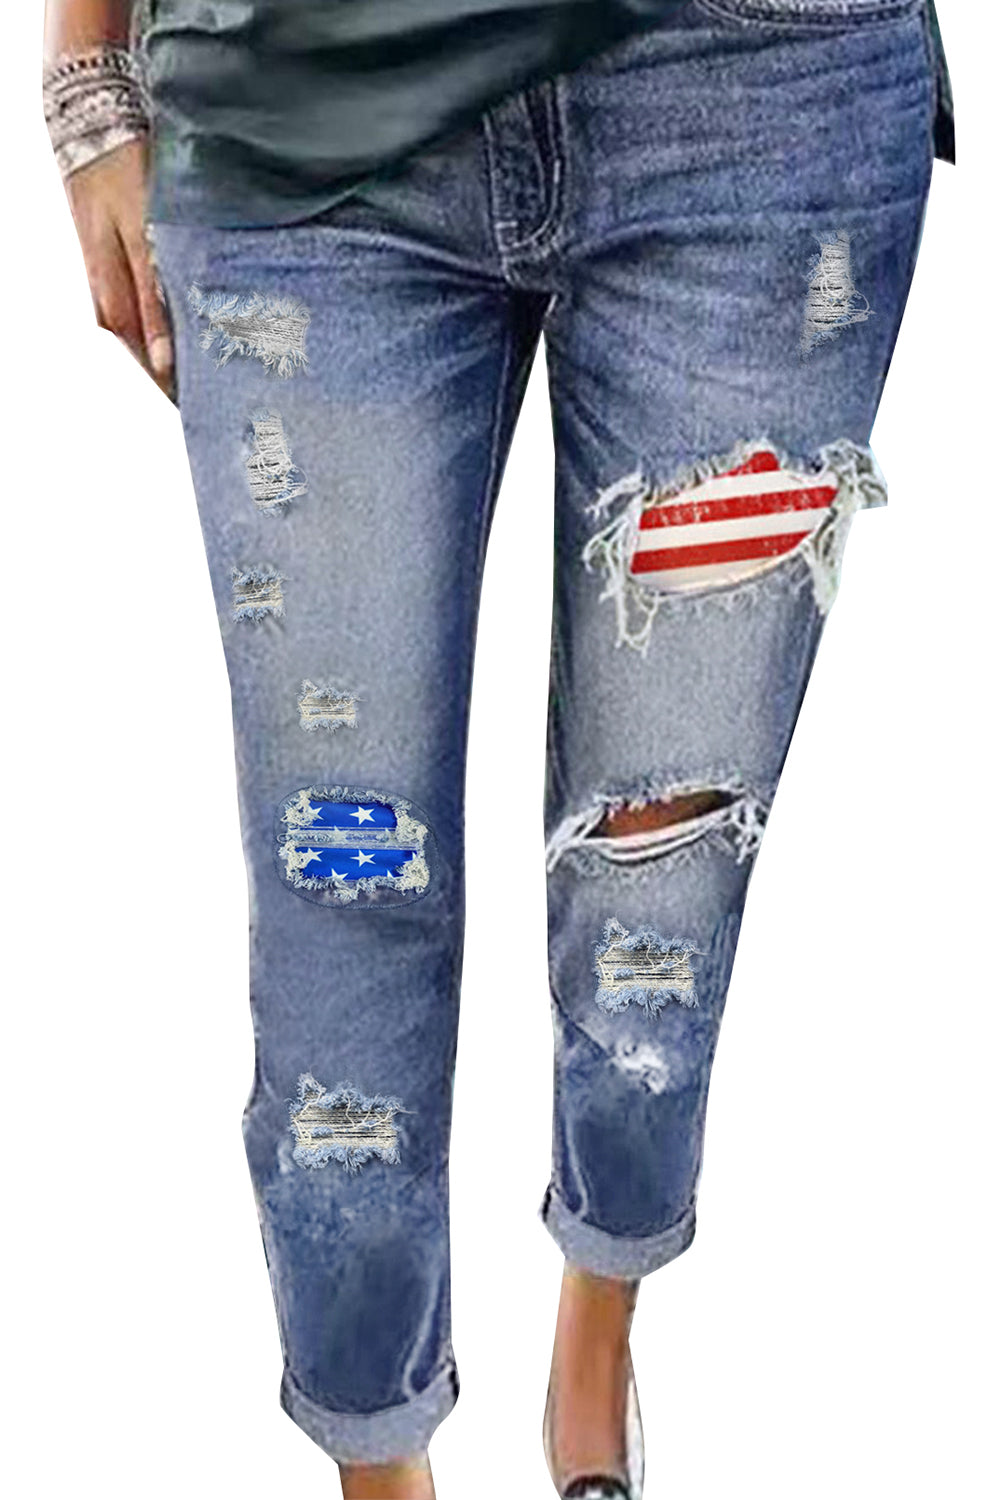 Vintage Stripes and Stars Patches Ripped Jeans